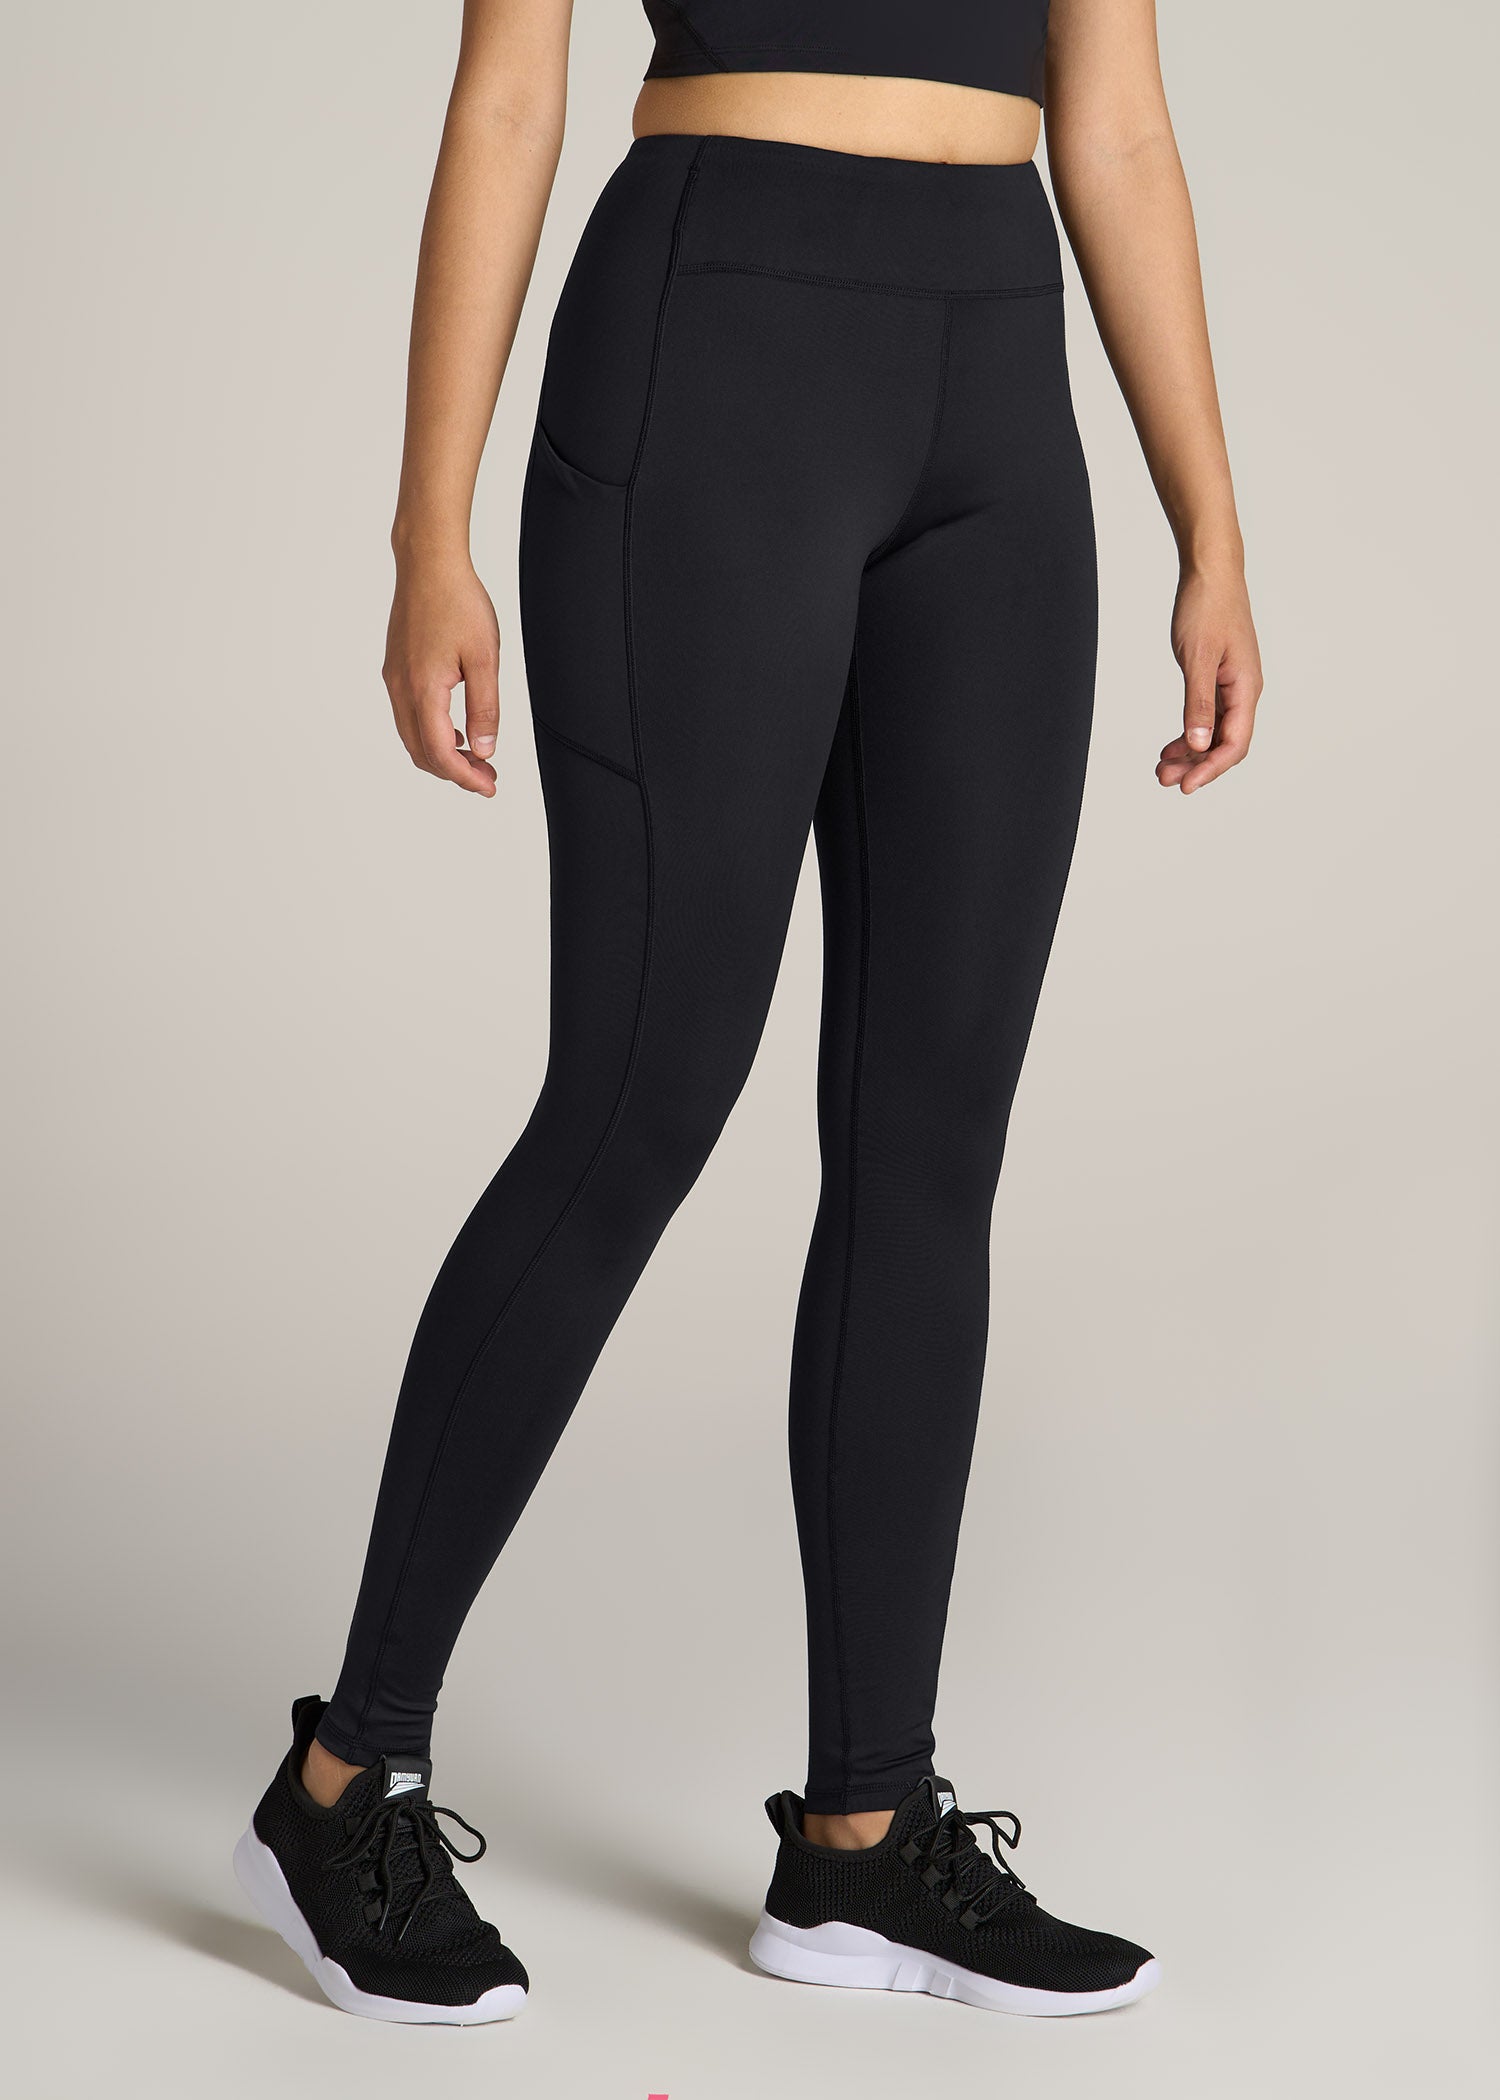 Leggings with Pockets for Petite Women - Cats & Coffee - Style